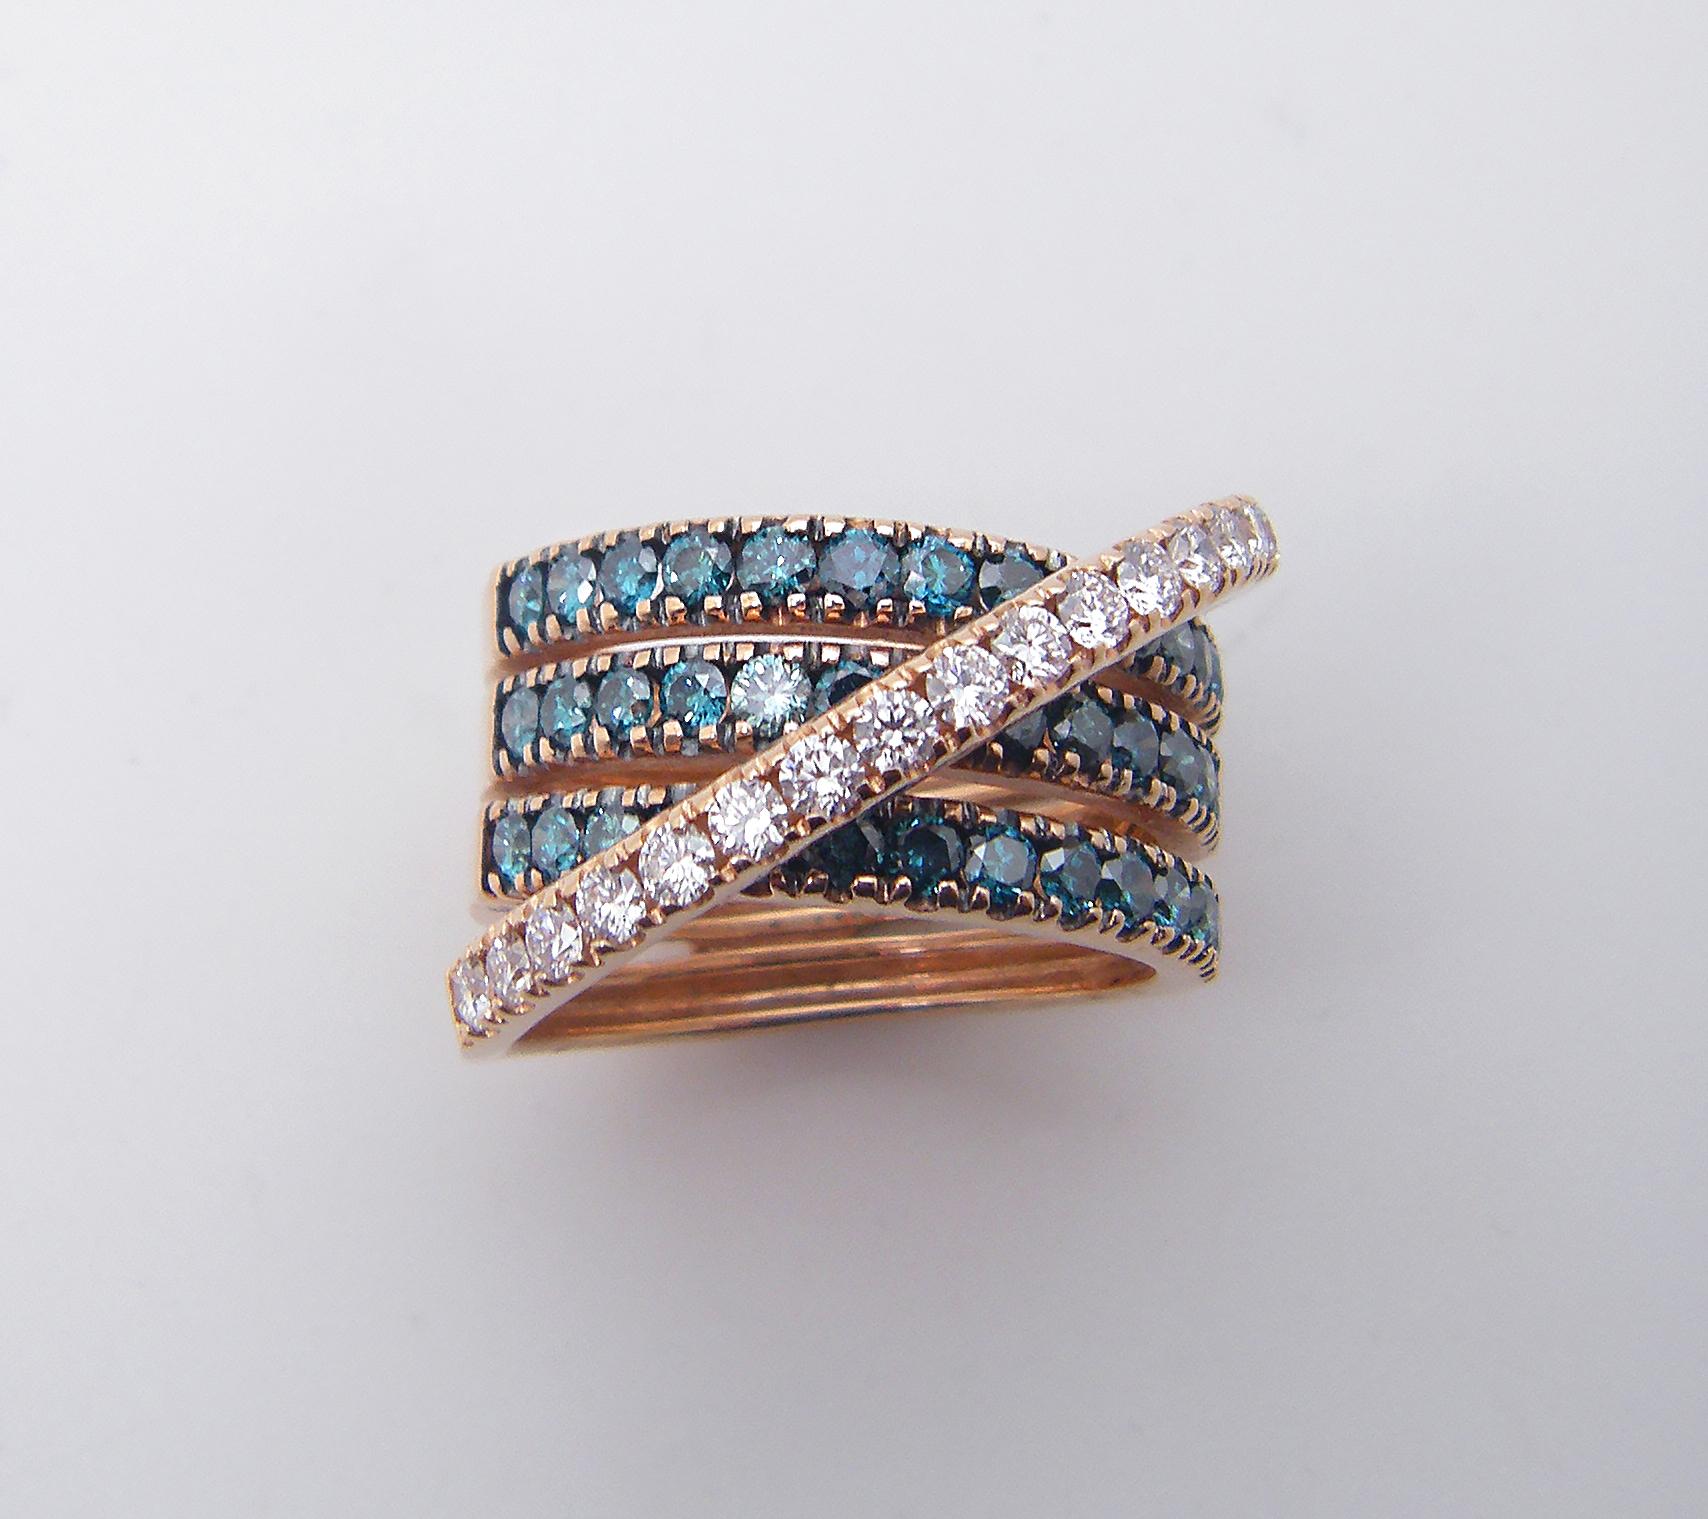 S.Georgios designer 18 Karat Two-Tone Rose Gold Brilliant Cut White and Blue Diamond Spiral Ring is all handmade in a unique design. The gorgeous ring features brilliant cut white diamonds total weight of 0.57 Carat and blue diamonds total weight of